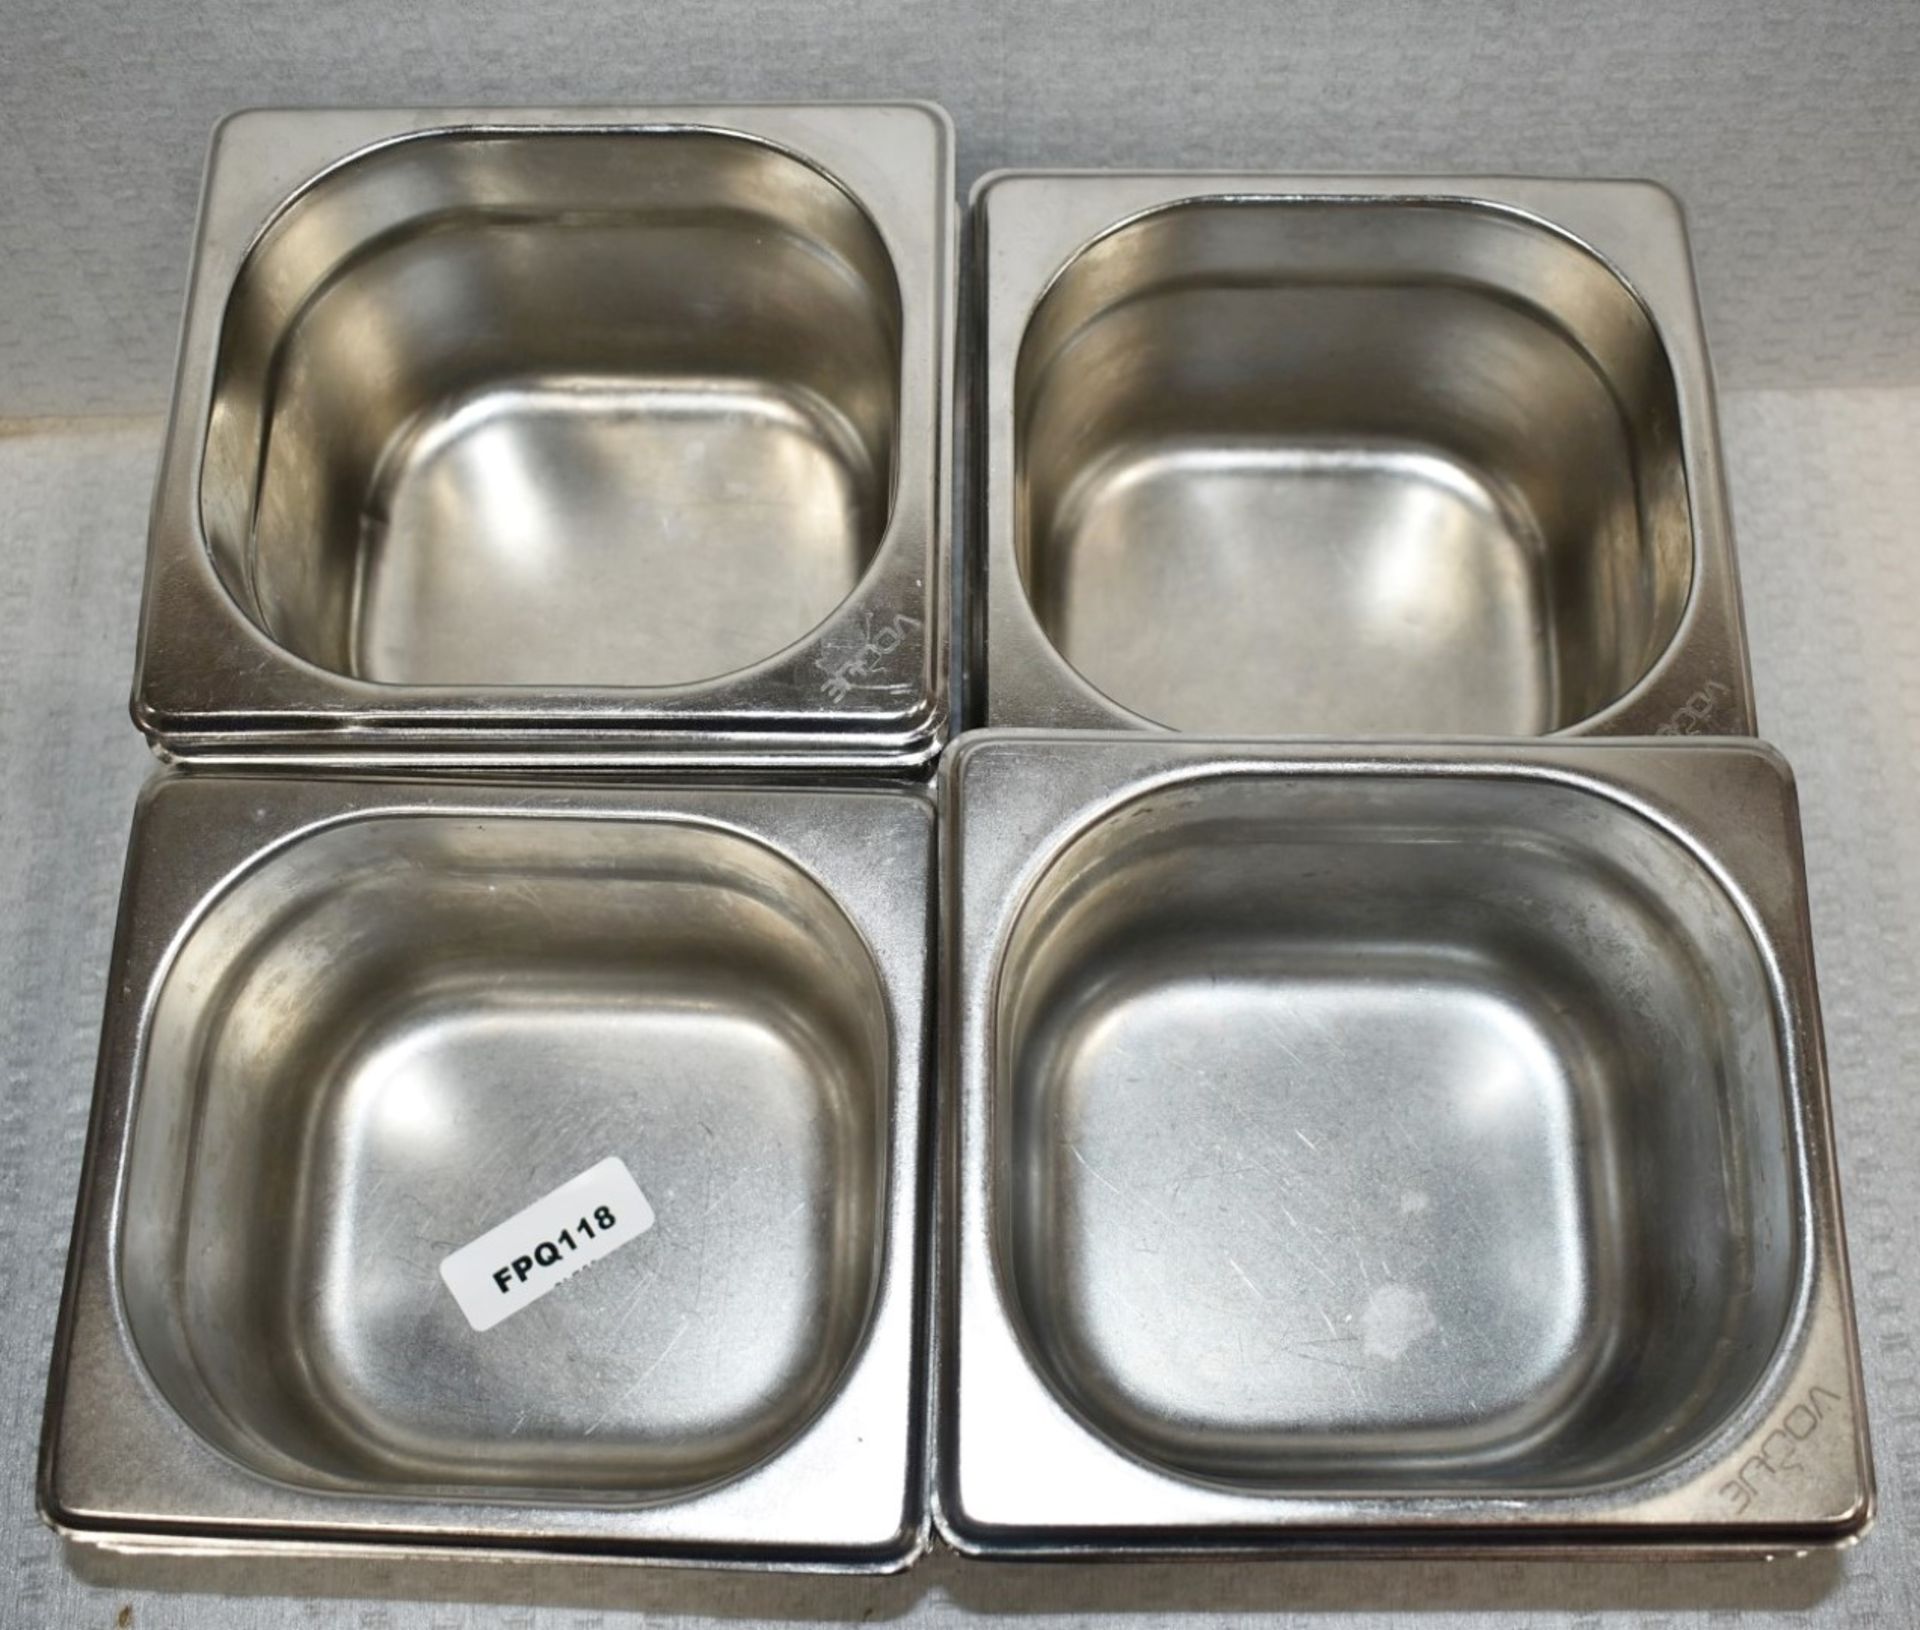 10 x Vogue Stainless Steel Gastronorm Pans Without Lids - Size: H10 x W16 x L17.5 cms - - Image 2 of 3